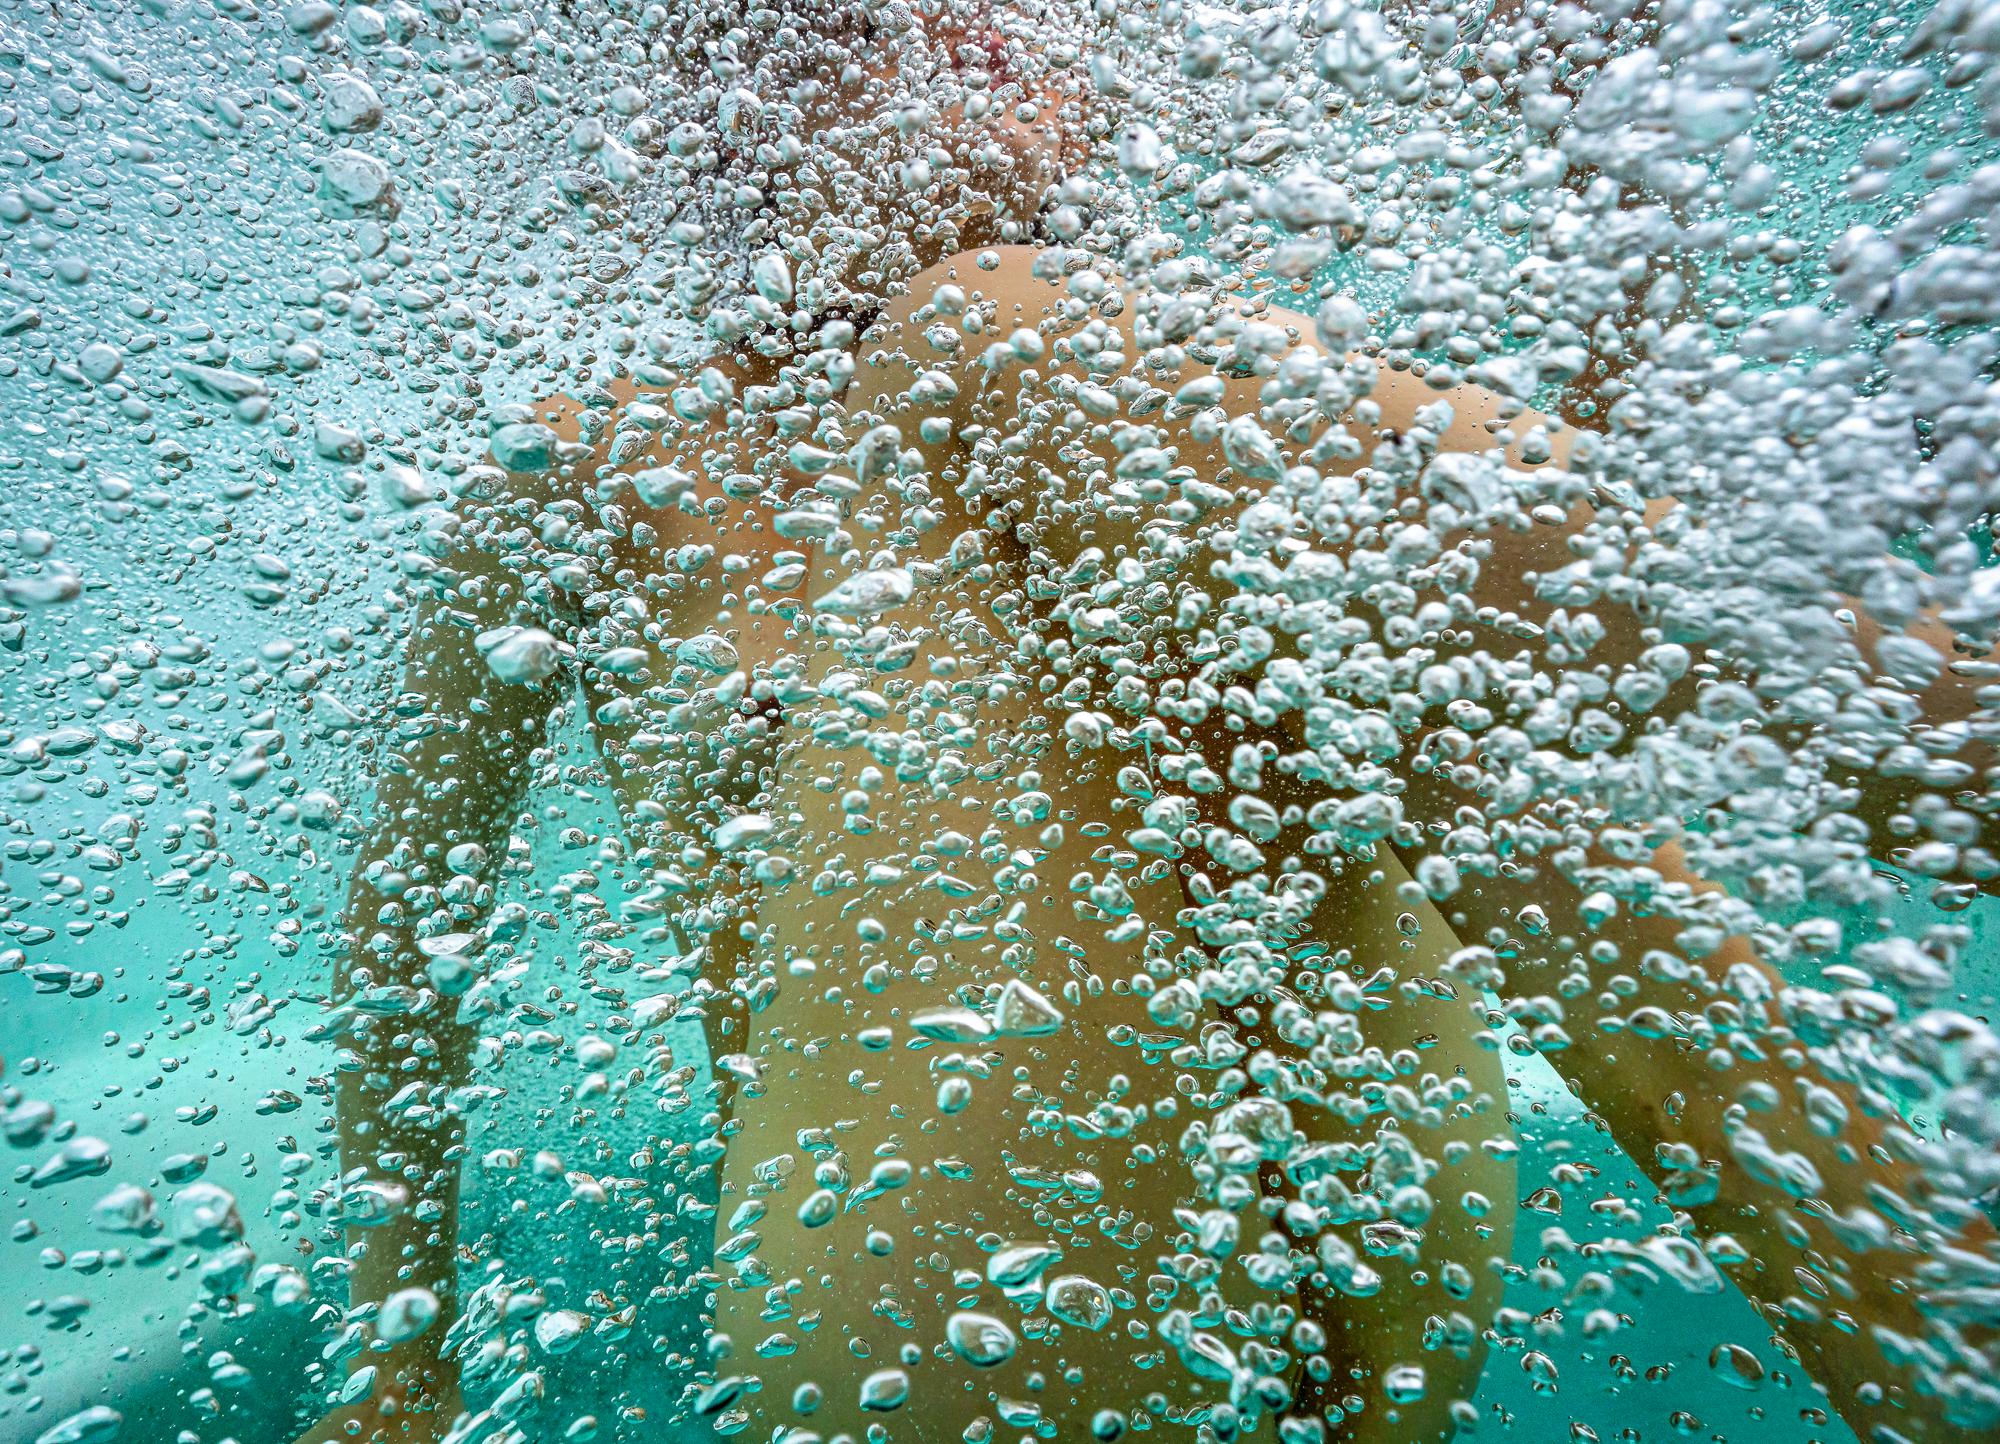 Alex Sher Nude Photograph - Hot Champagne  - underwater nude photograph - archival pigment print 25x35"